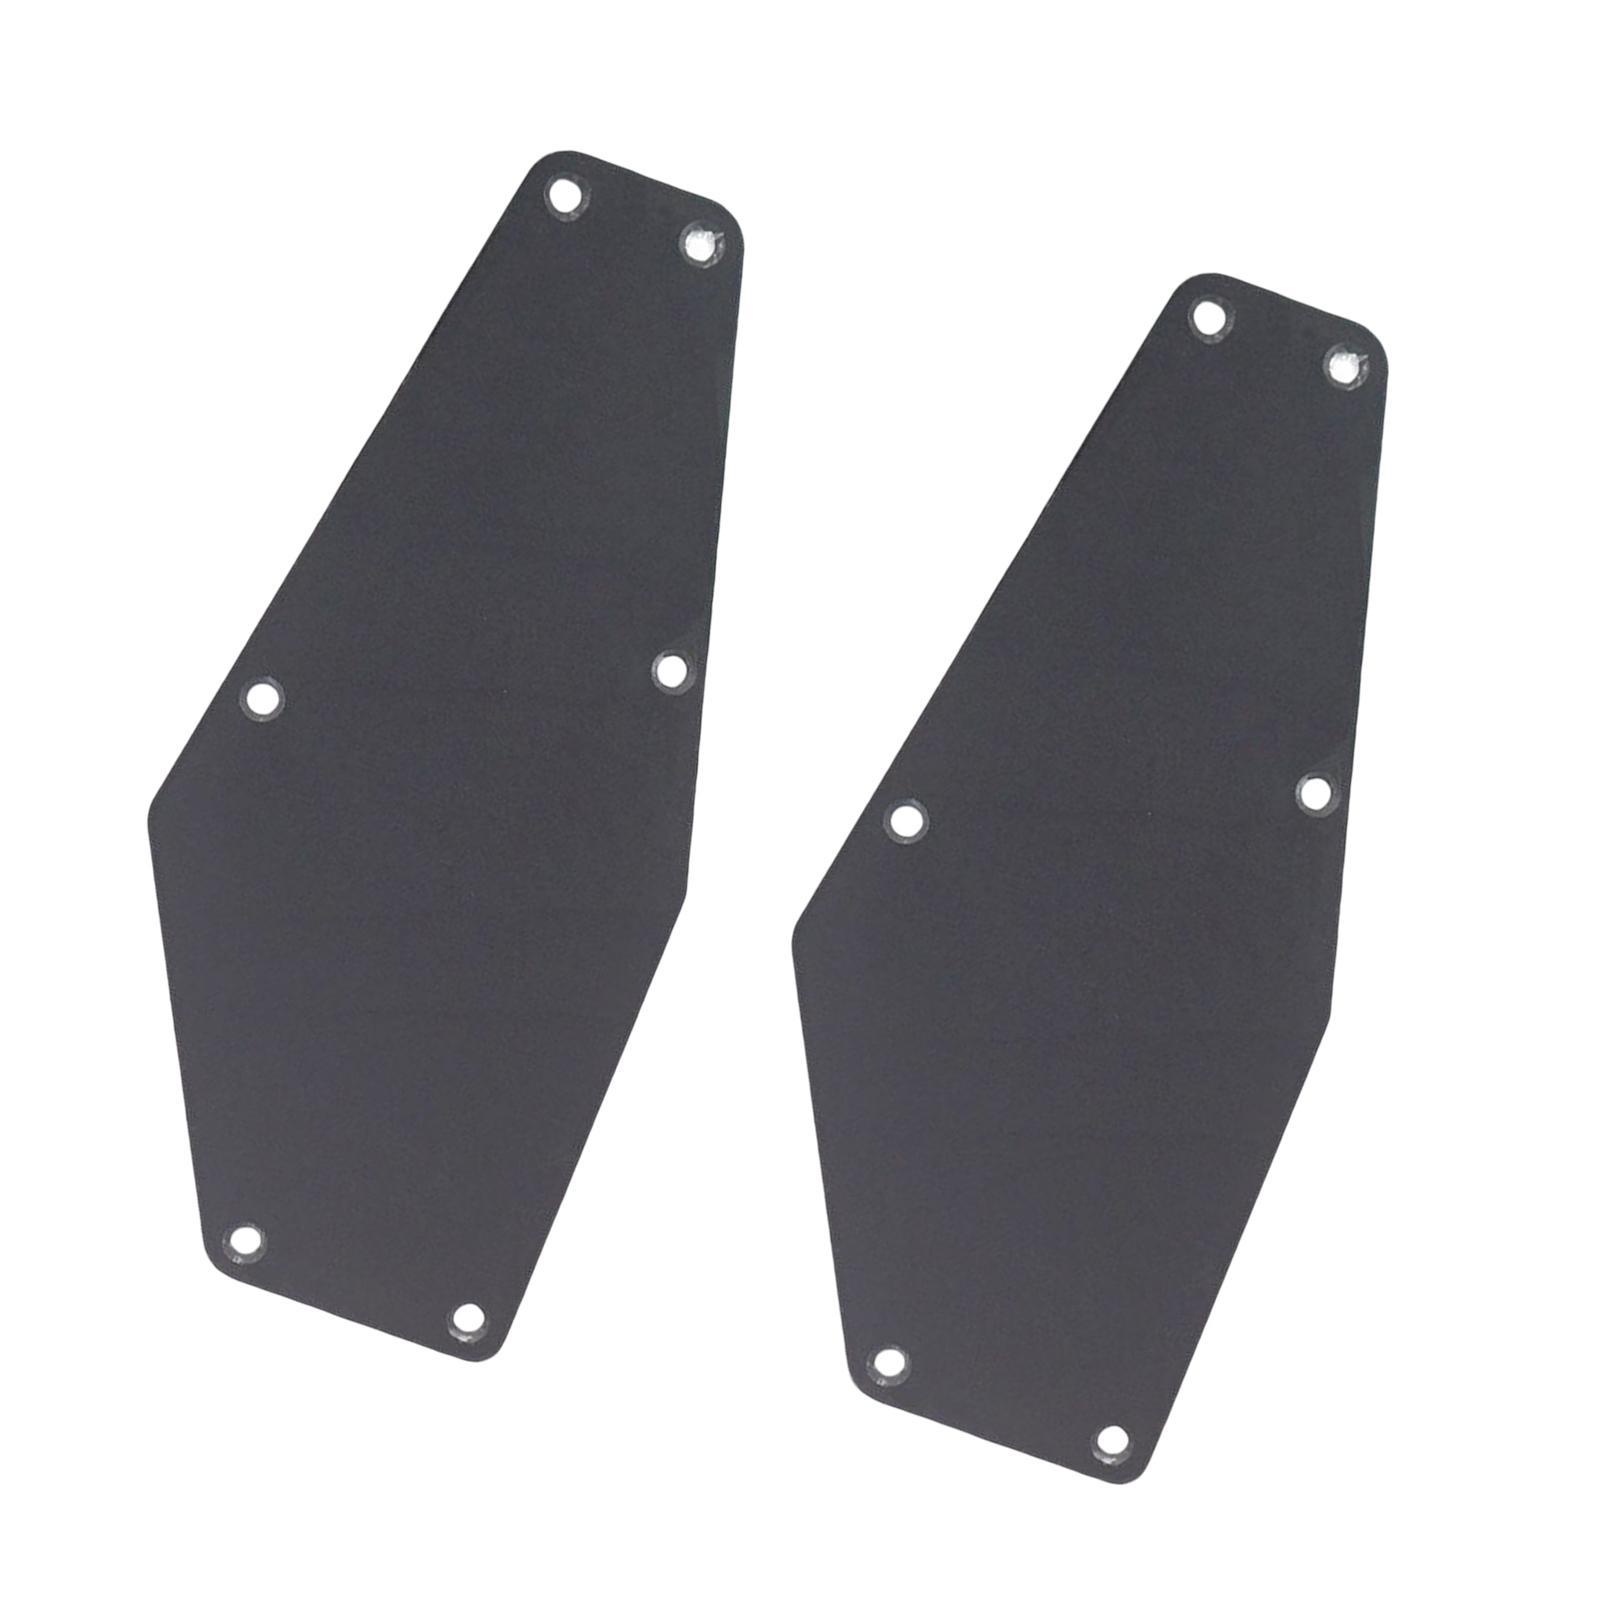 Set of 2 Guitar Pick Guard Guitar Backplate for Electric Bass, Guitar Parts